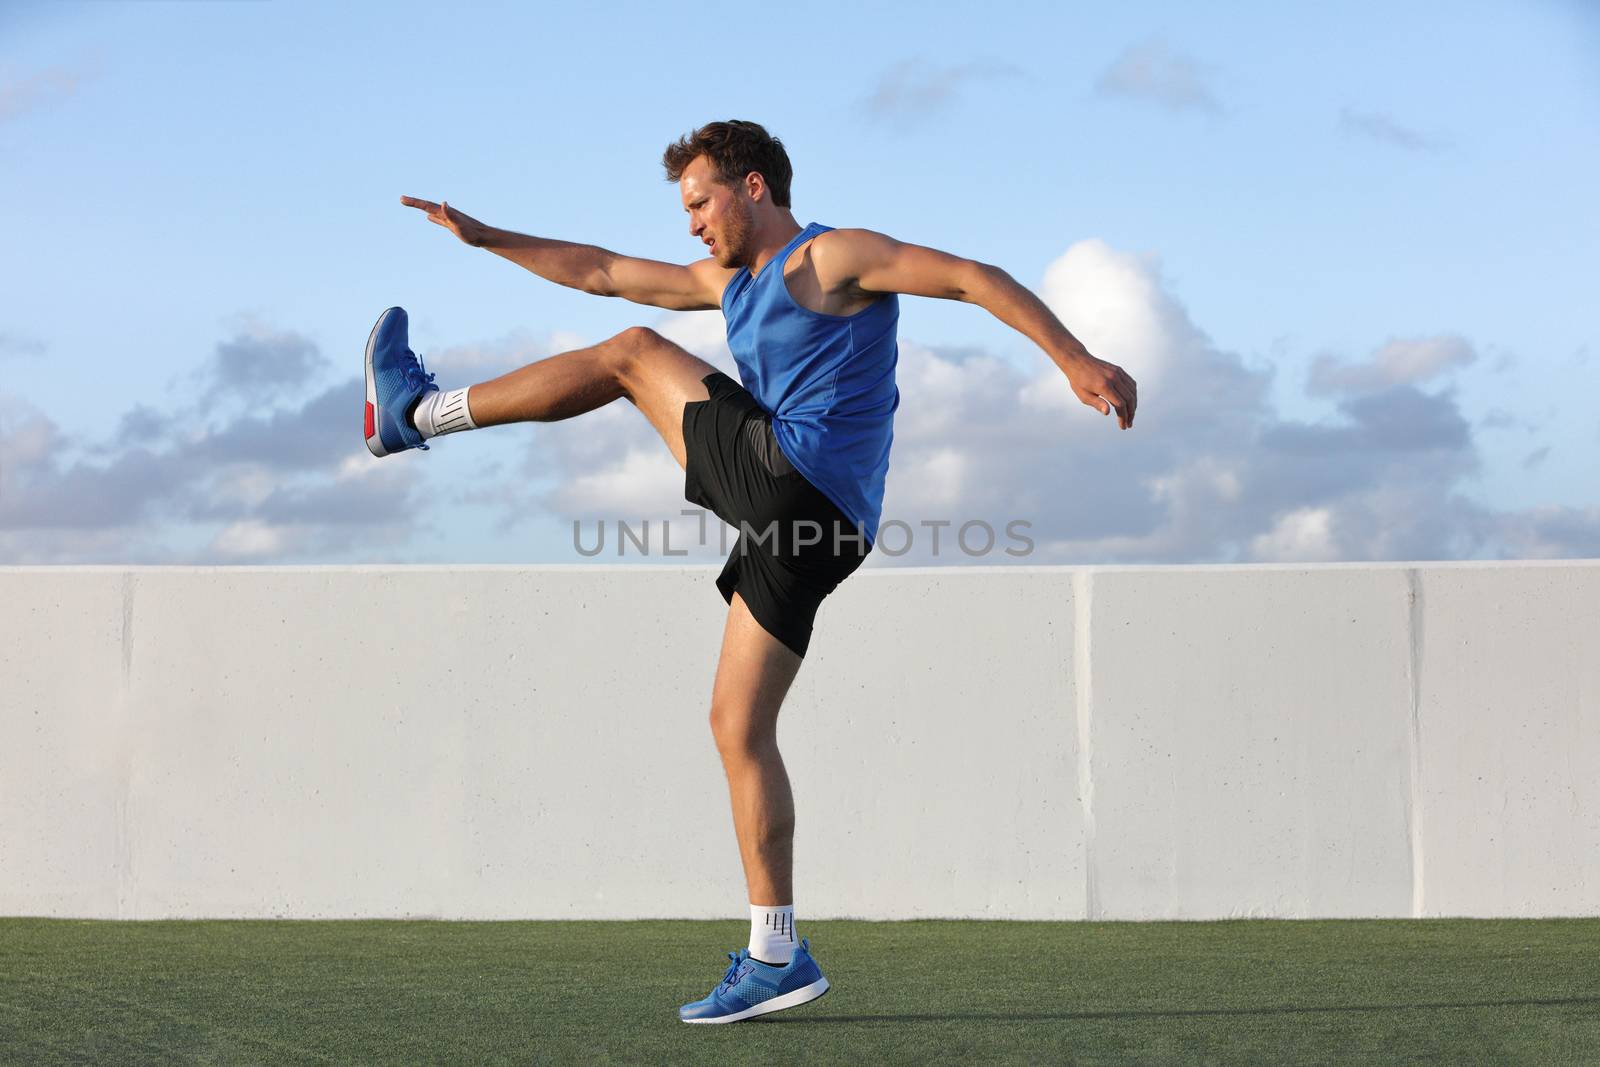 Runner man getting ready to run doing warm-up dynamic leg stretch exercises routine, Male athlete stretching lower body hamstring muscles before going running outside in summer outdoors.